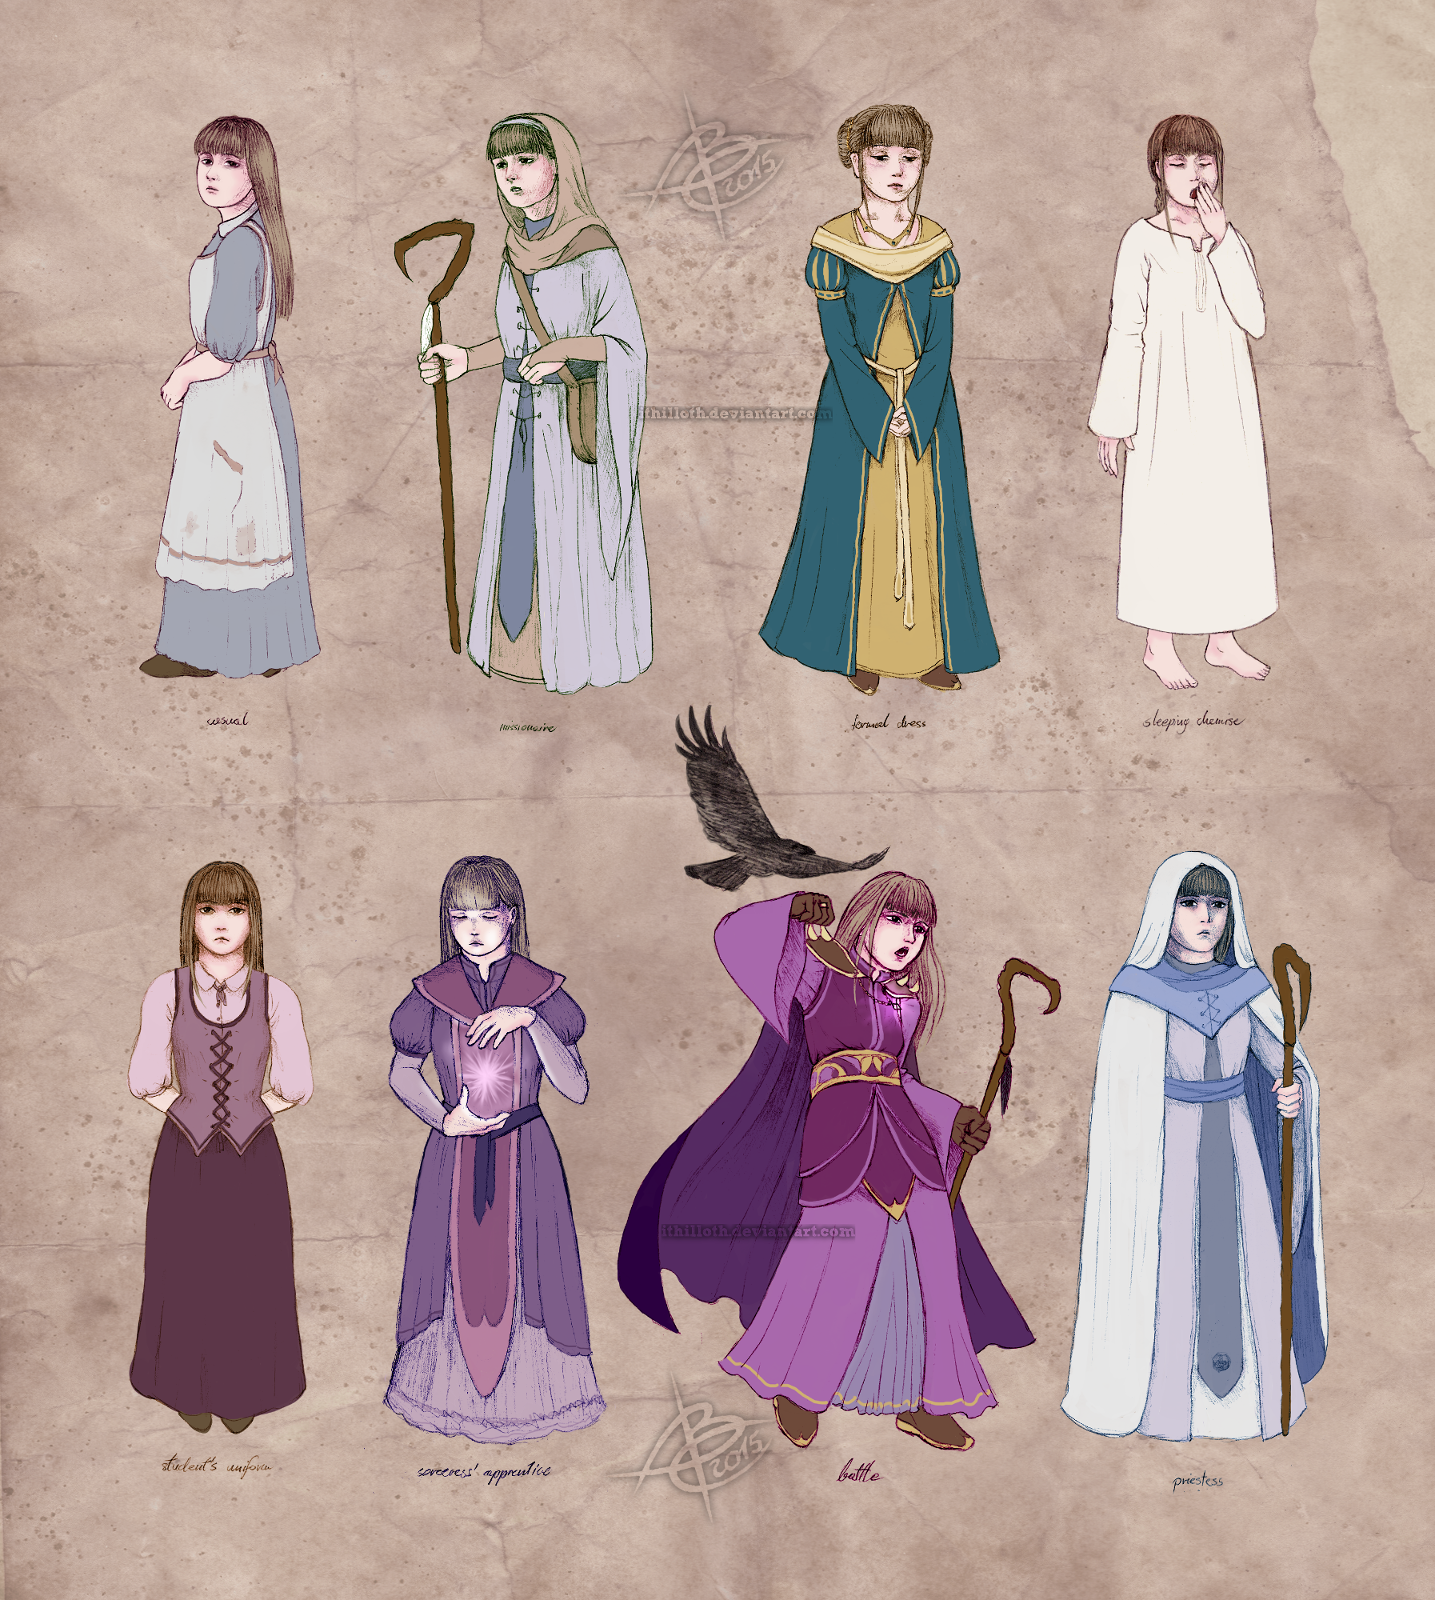 mage-cleric outfits / Rowena ref sheet by SpaceCastaway on DeviantArt